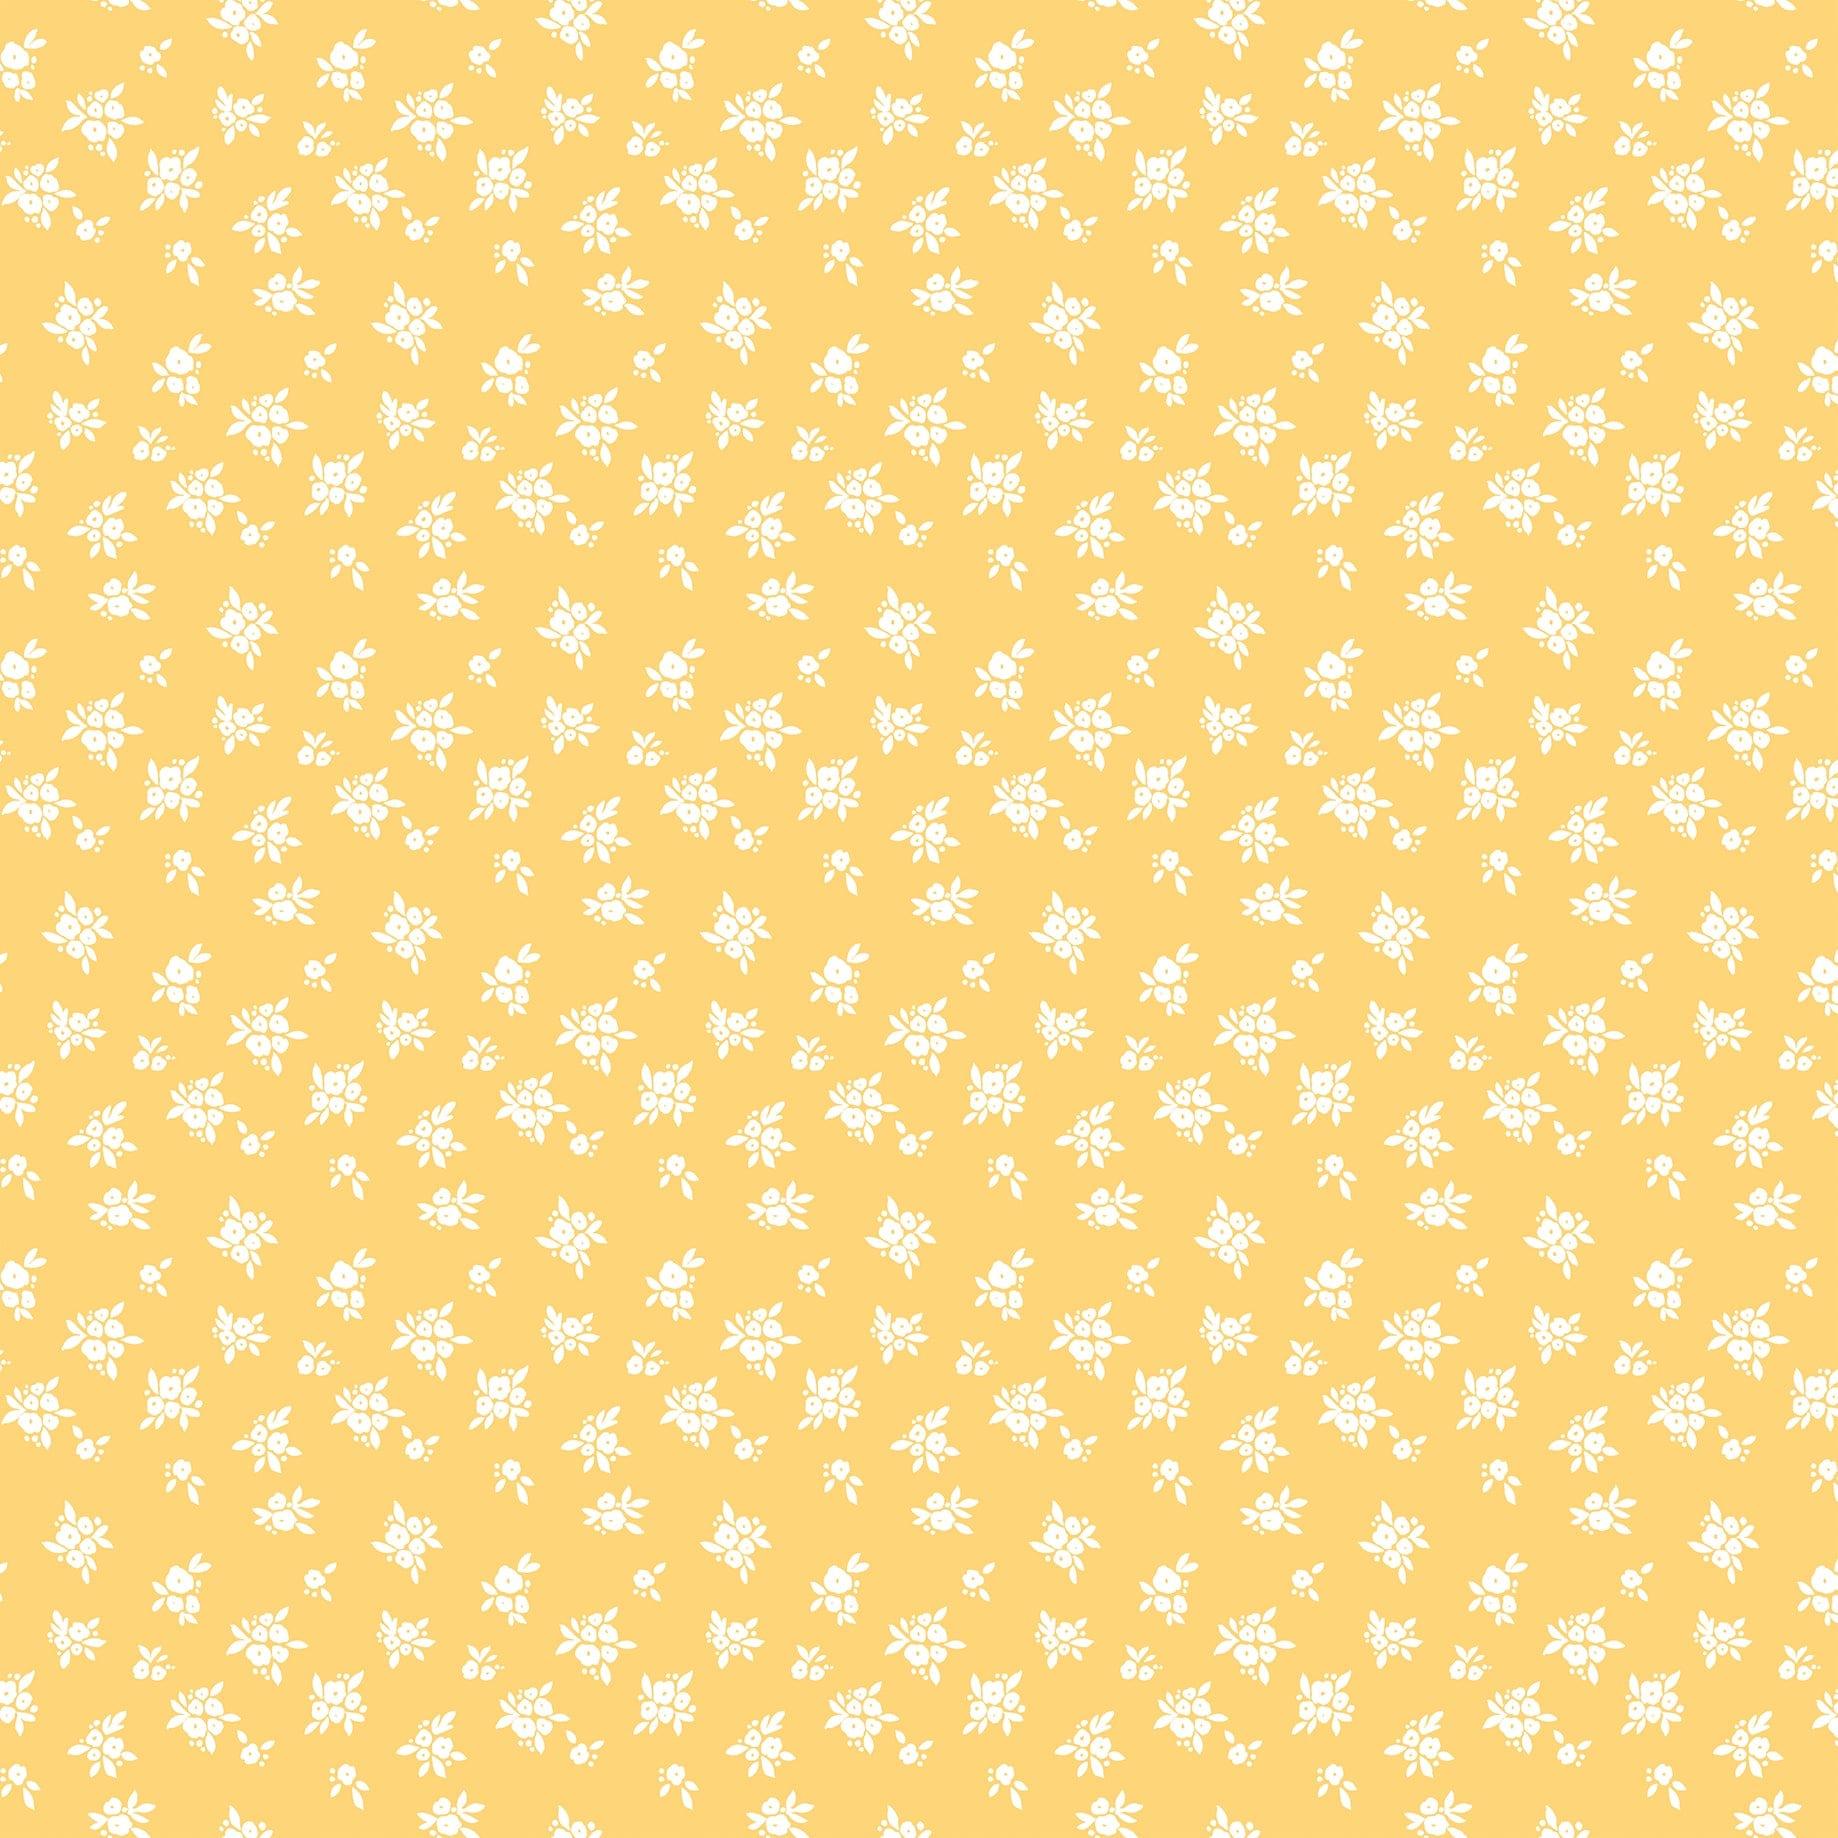 My Favorite Easter Collection Good Egg 12 x 12 Double-Sided Scrapbook Paper by Echo Park Paper - Scrapbook Supply Companies